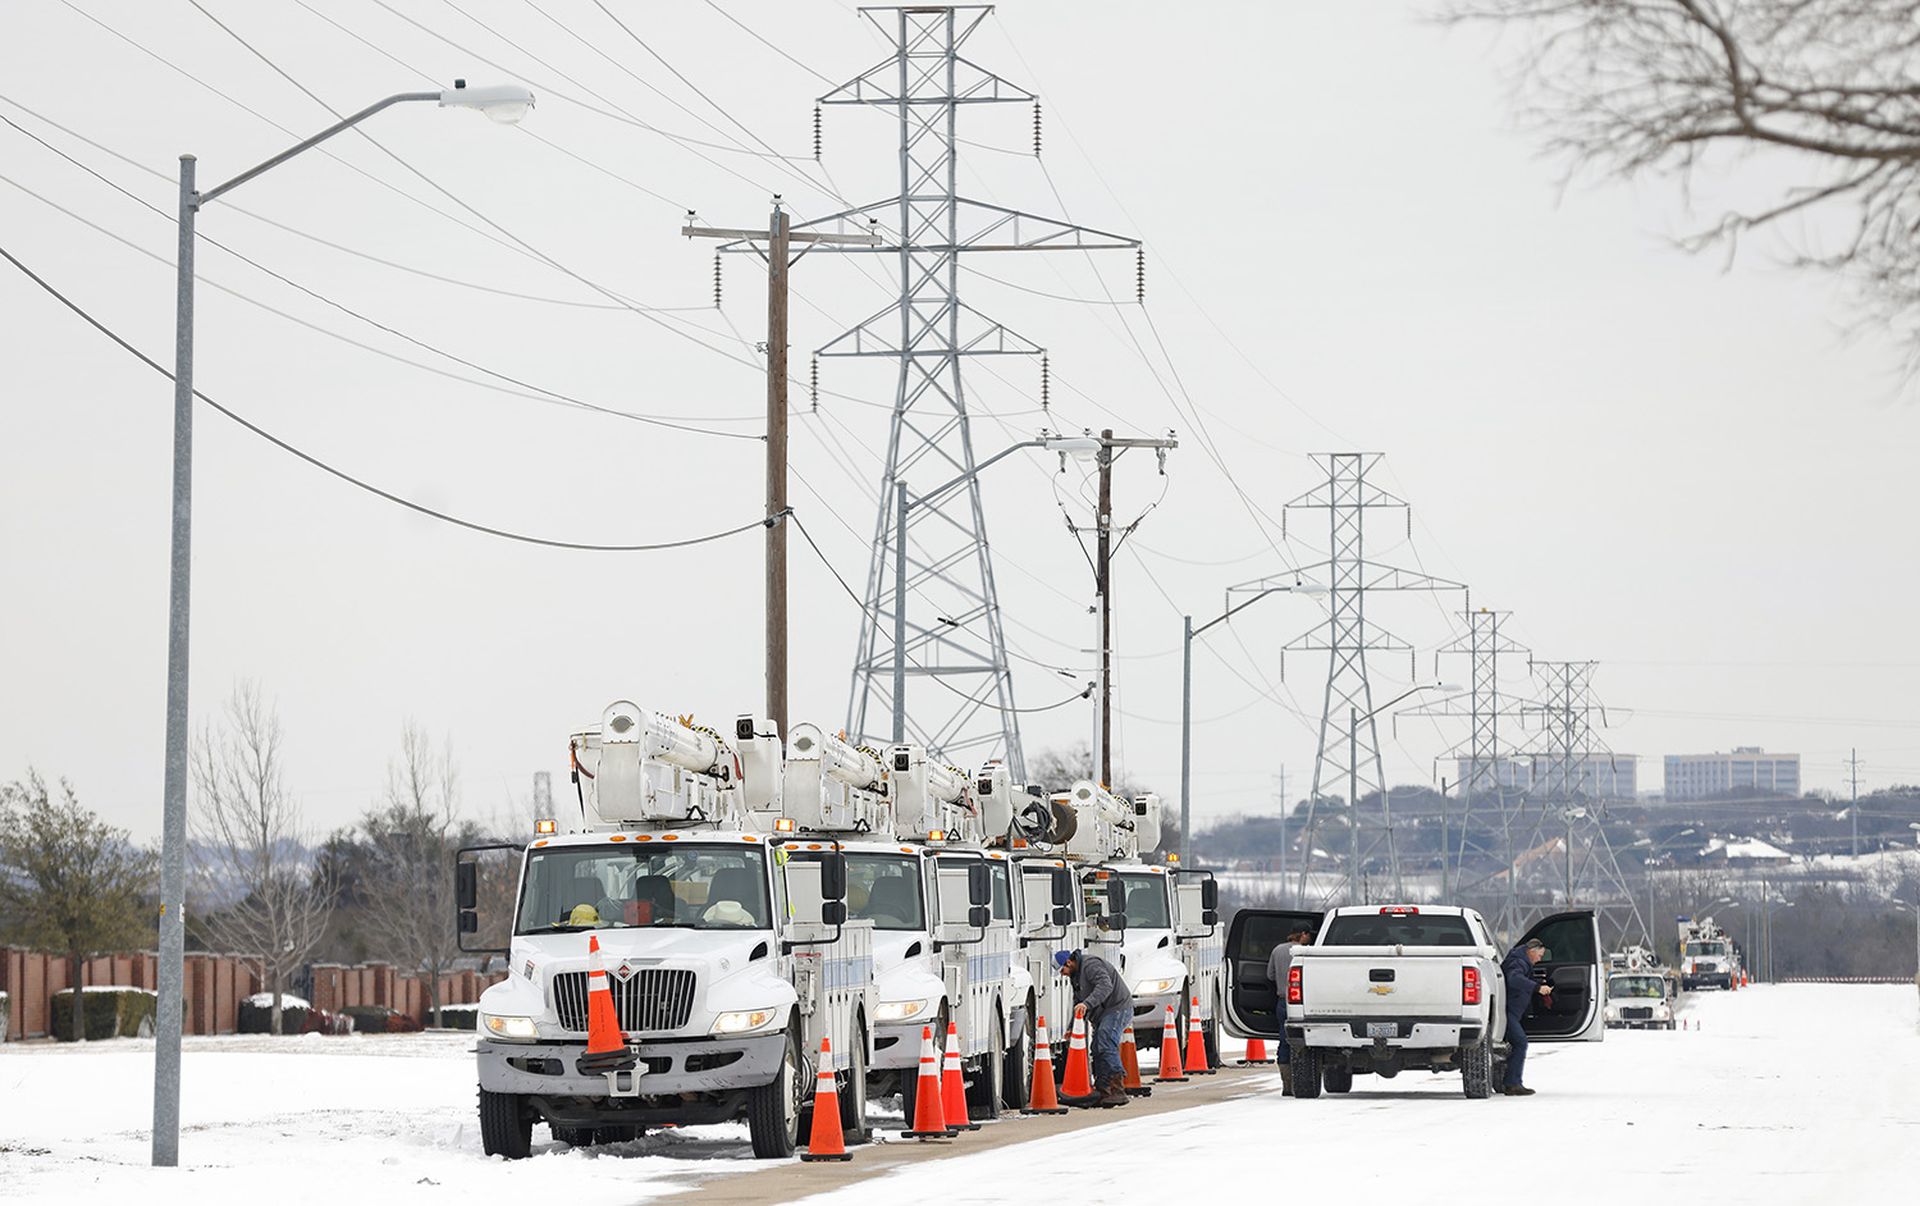 Pike Electric service trucks line up after a snow storm Feb. 16, 2021, in Fort Worth, Texas. (Photo by Ron Jenkins/Getty Images)